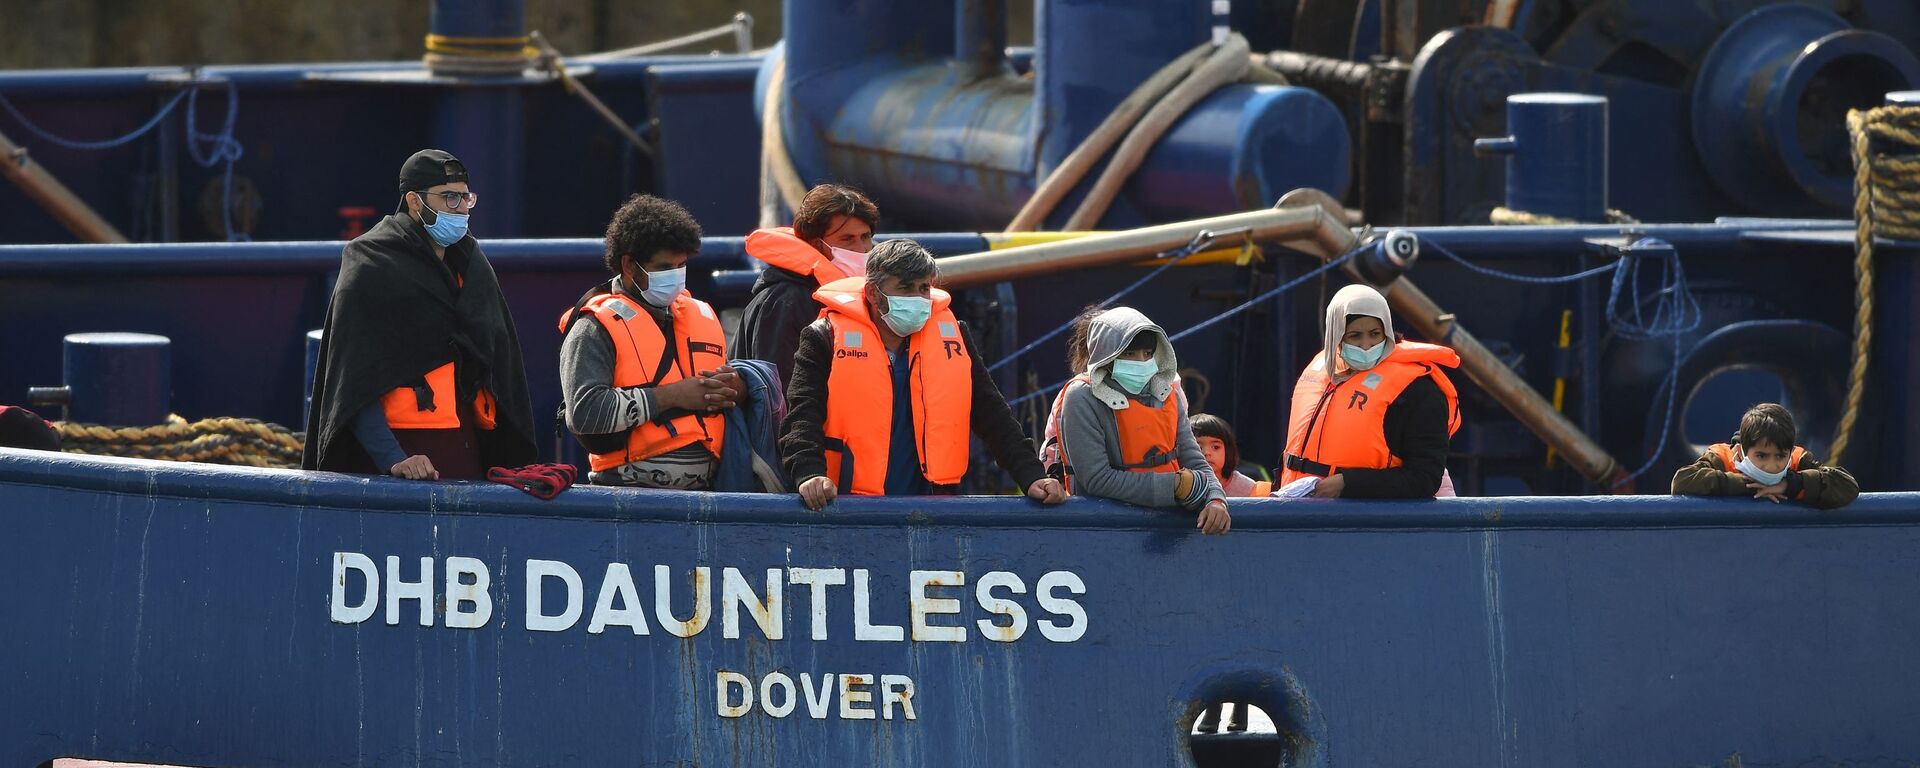 Waleed (3L), 29, a Kuwaiti migrant, stands with other migrants onboard the DHB Dauntless tug boat as they are brought to shore by the UK Border Force after illegally crossing the English Channel from France on a dinghy on September 11, 2020, in the marina at Dover, on the south coast of England - Sputnik International, 1920, 18.04.2022